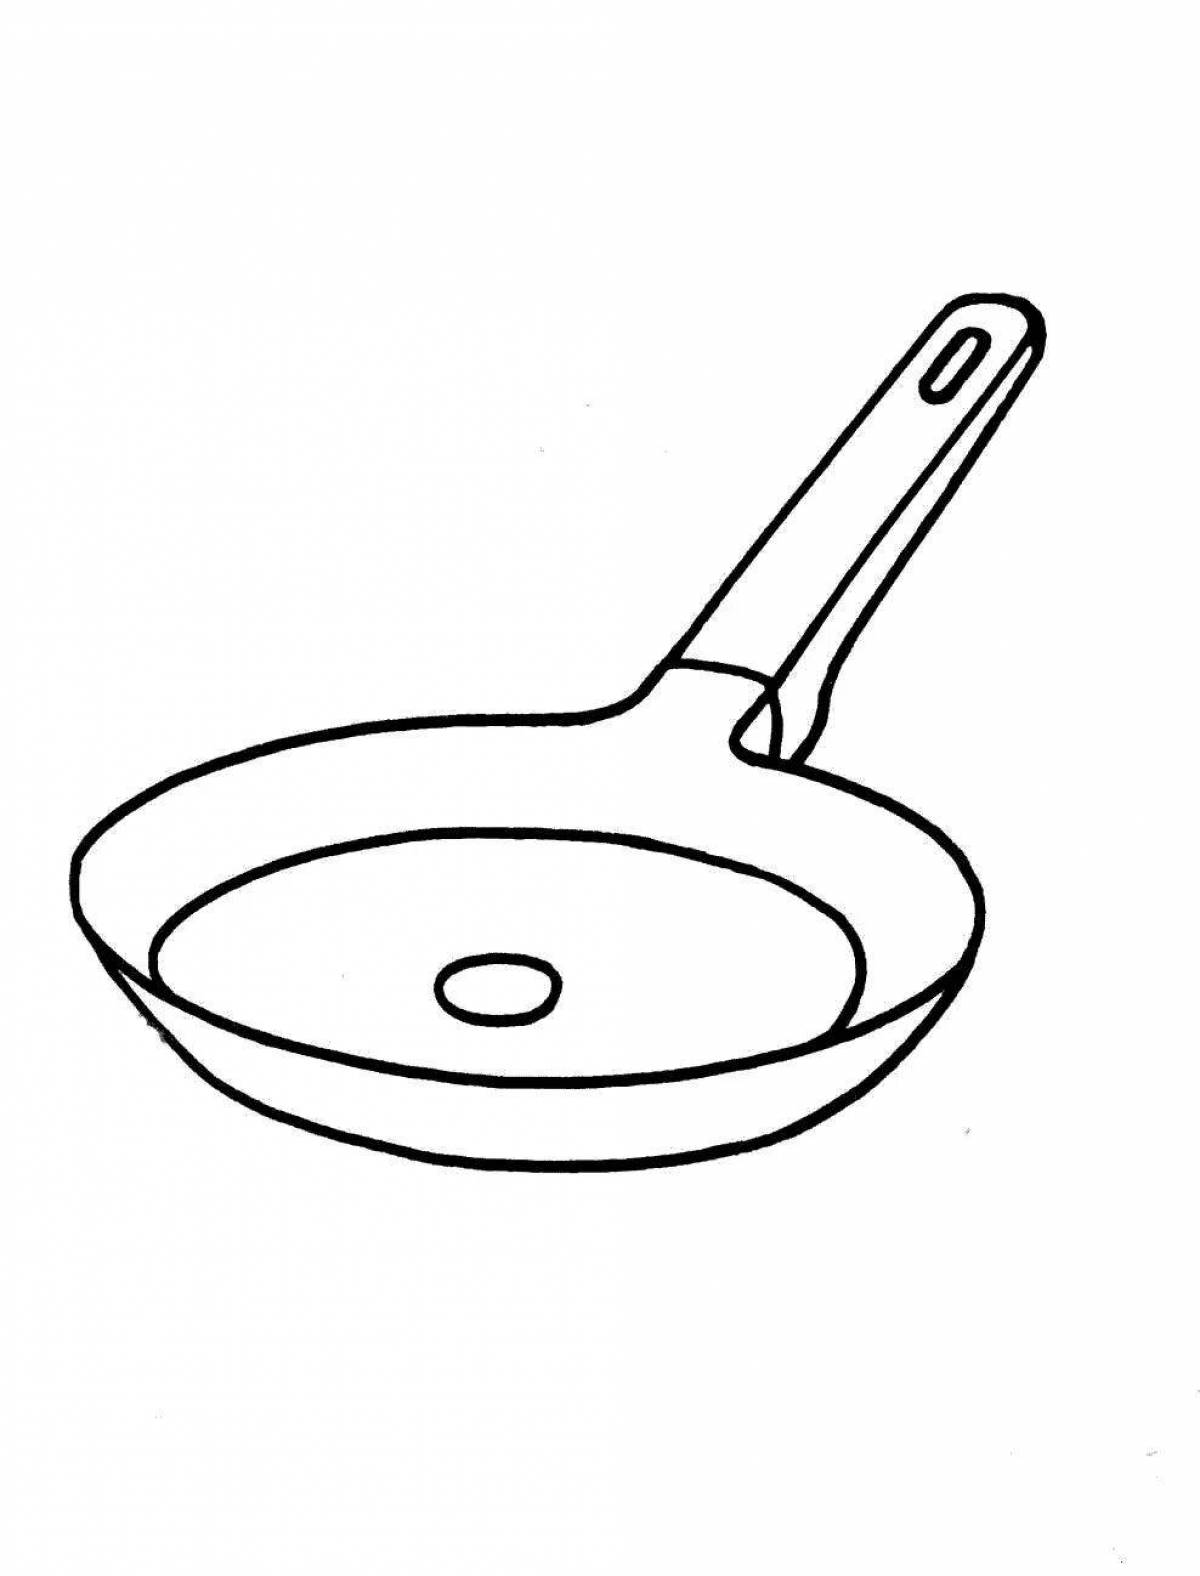 Adorable frying pan coloring book for 3-4 year olds